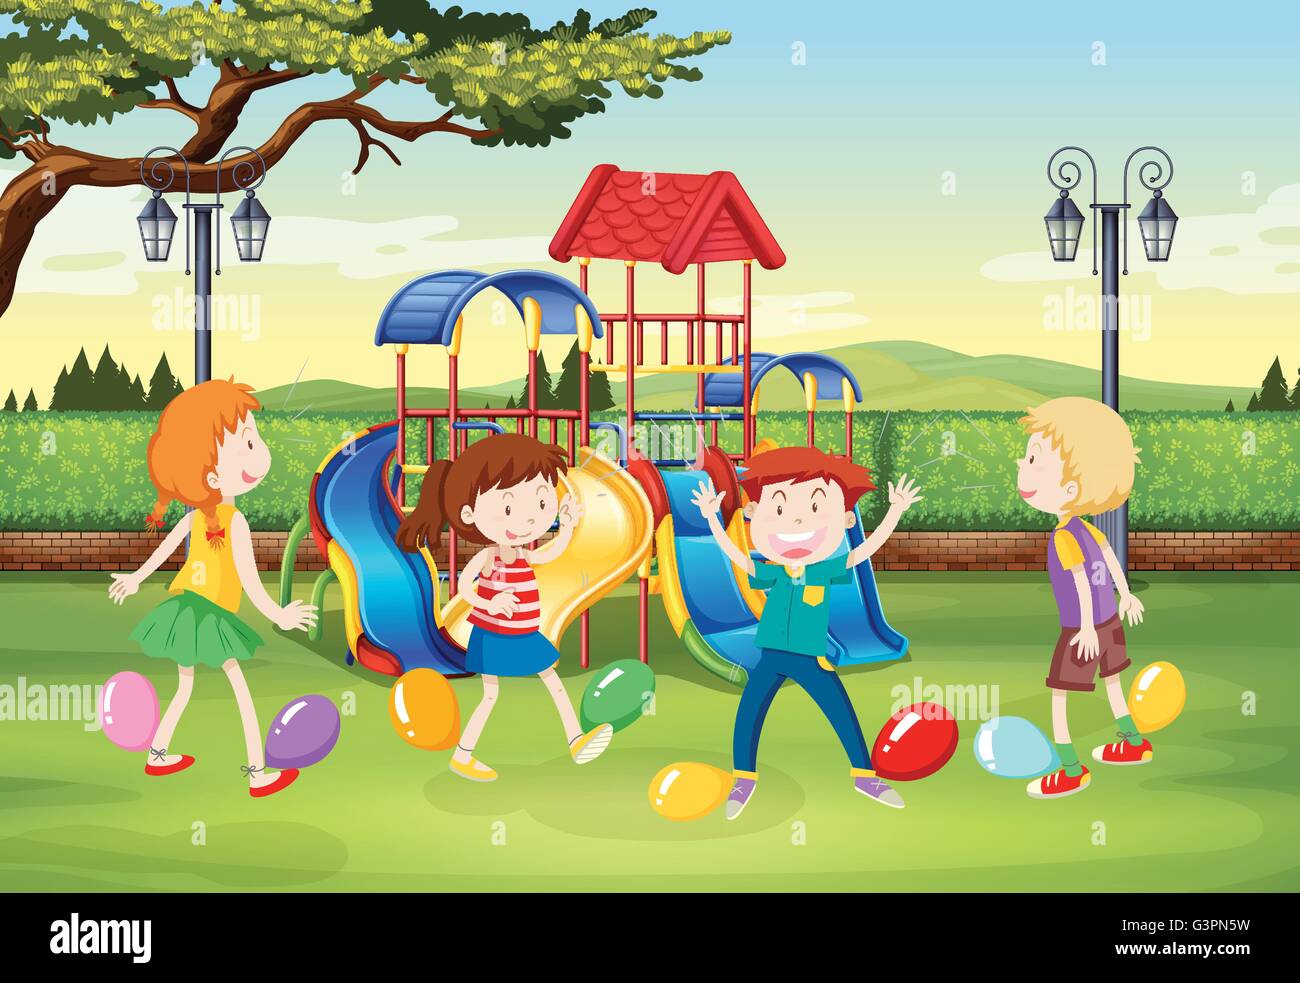 Children playing balloon popping in the park illustration Stock Vector